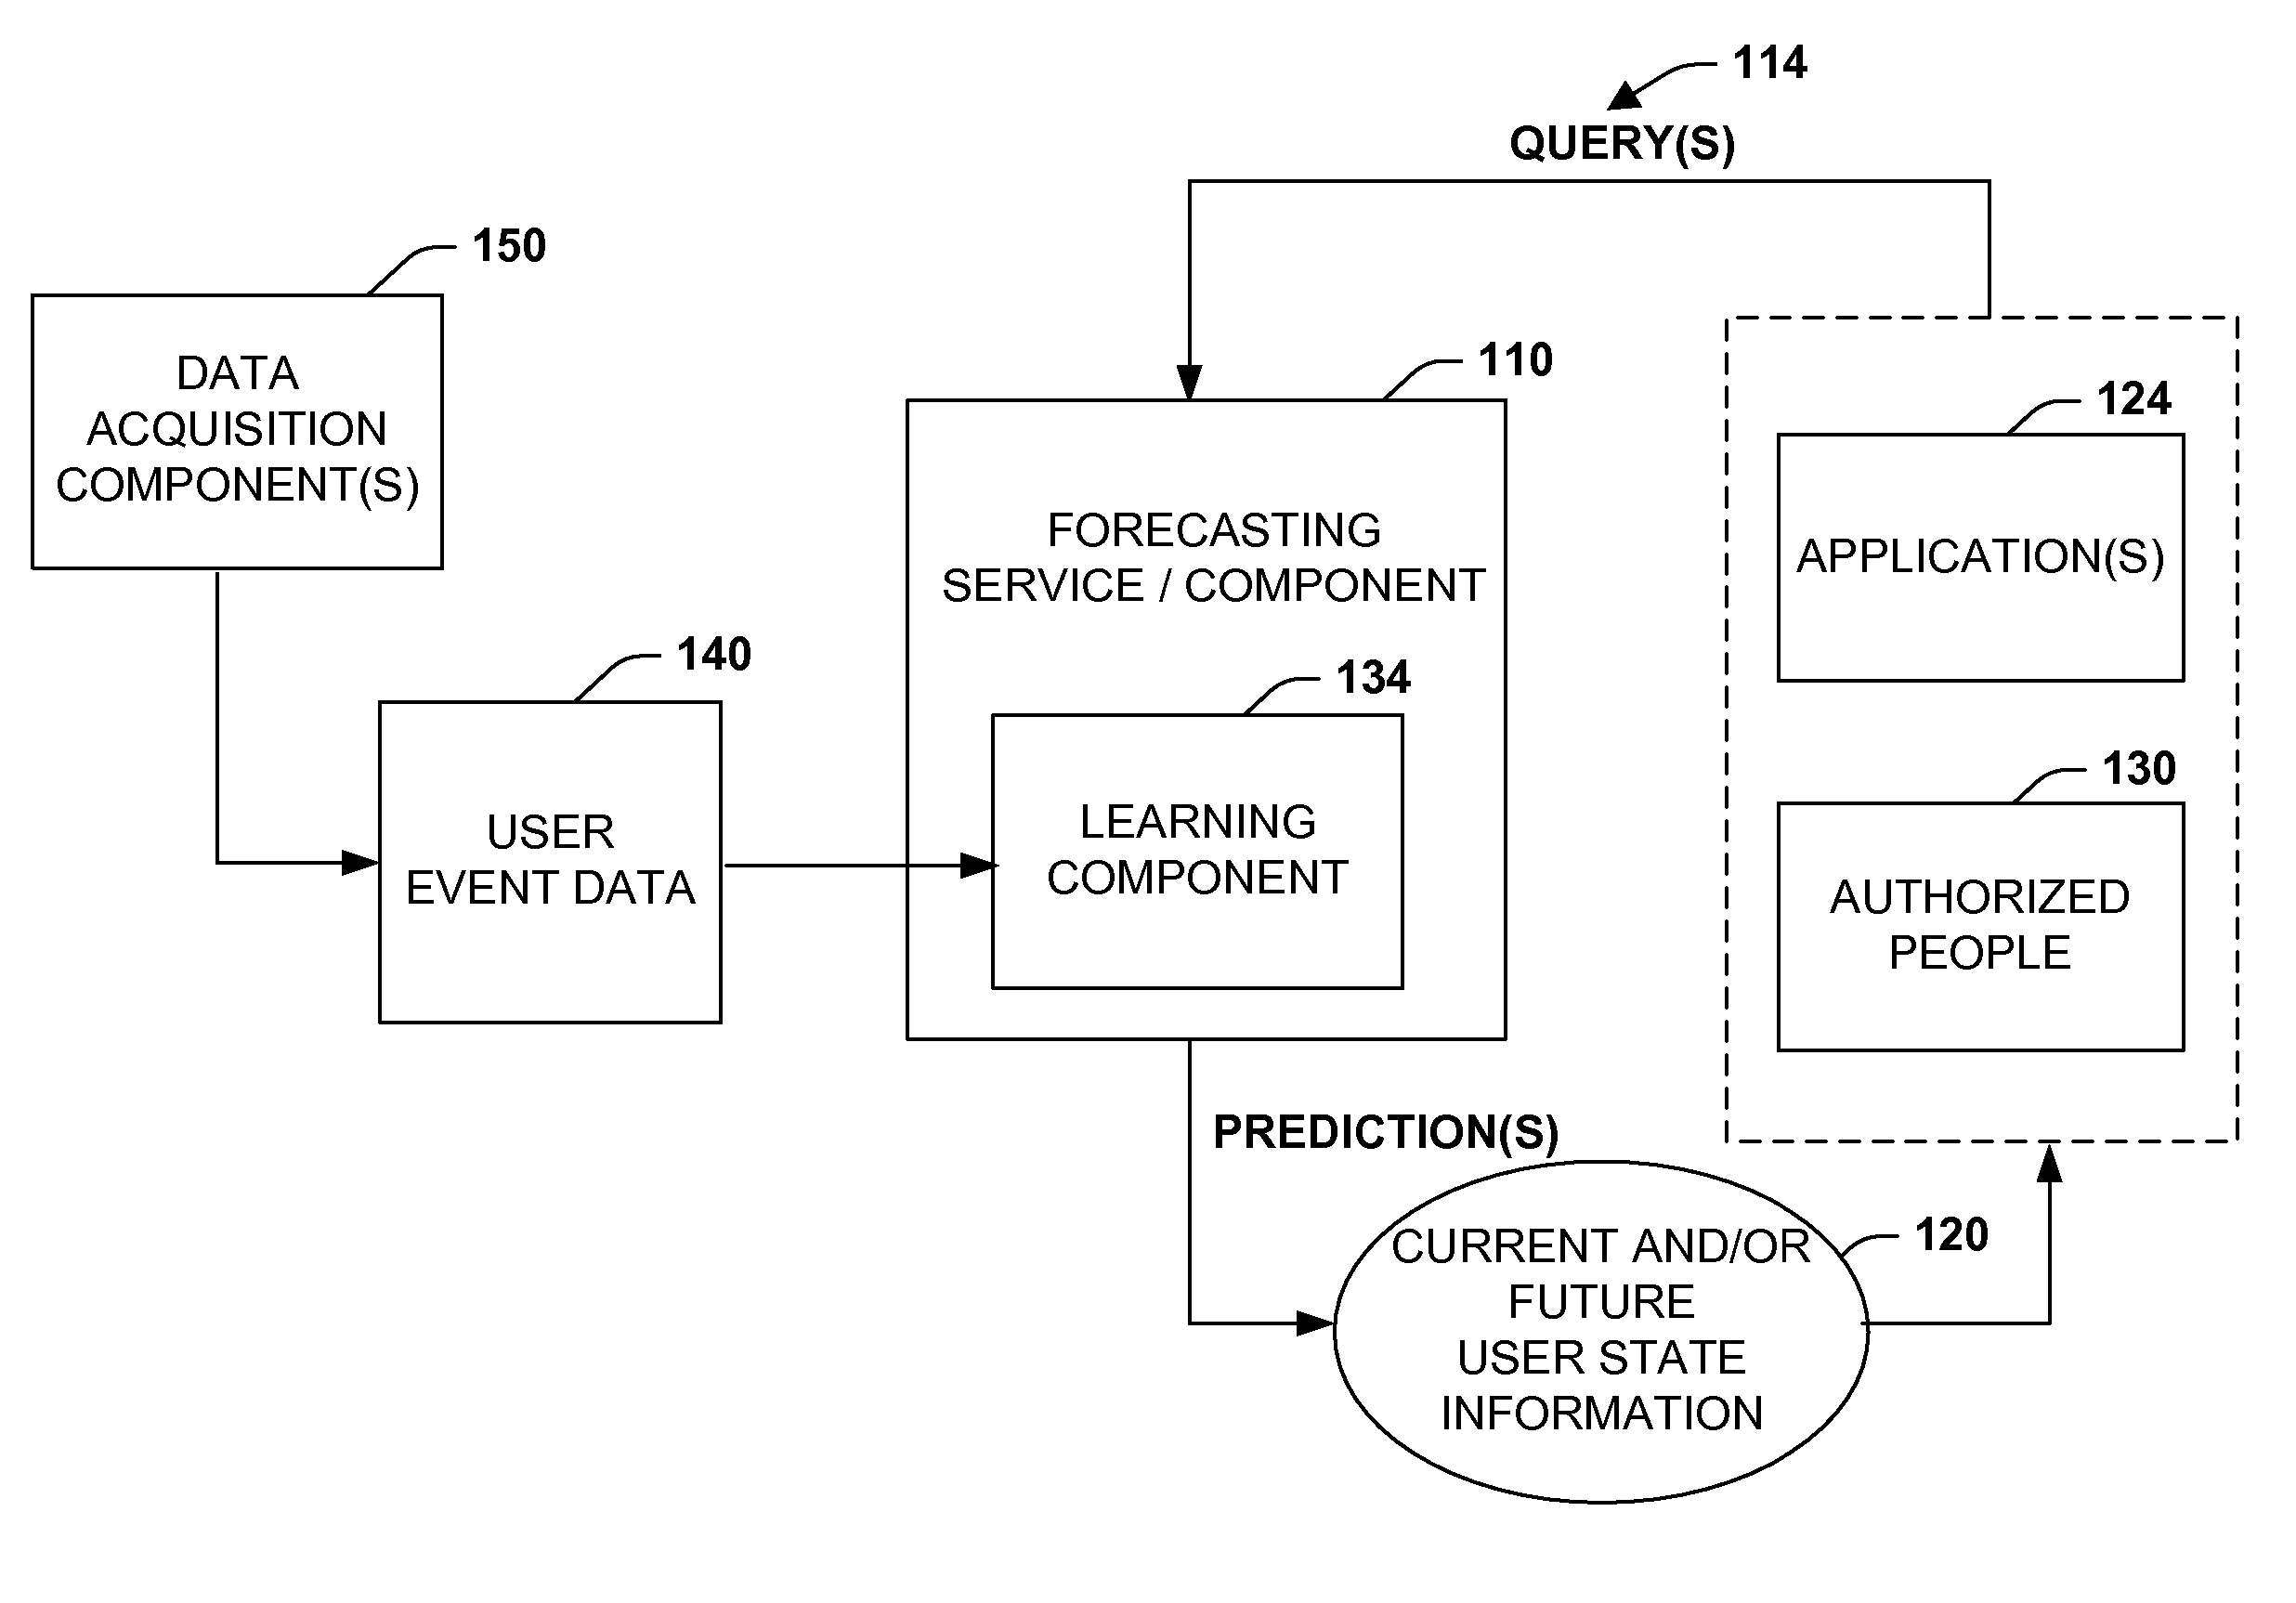 Methods and architecture for cross-device activity monitoring, reasoning, and visualization for providing status and forecasts of a users' presence and availability